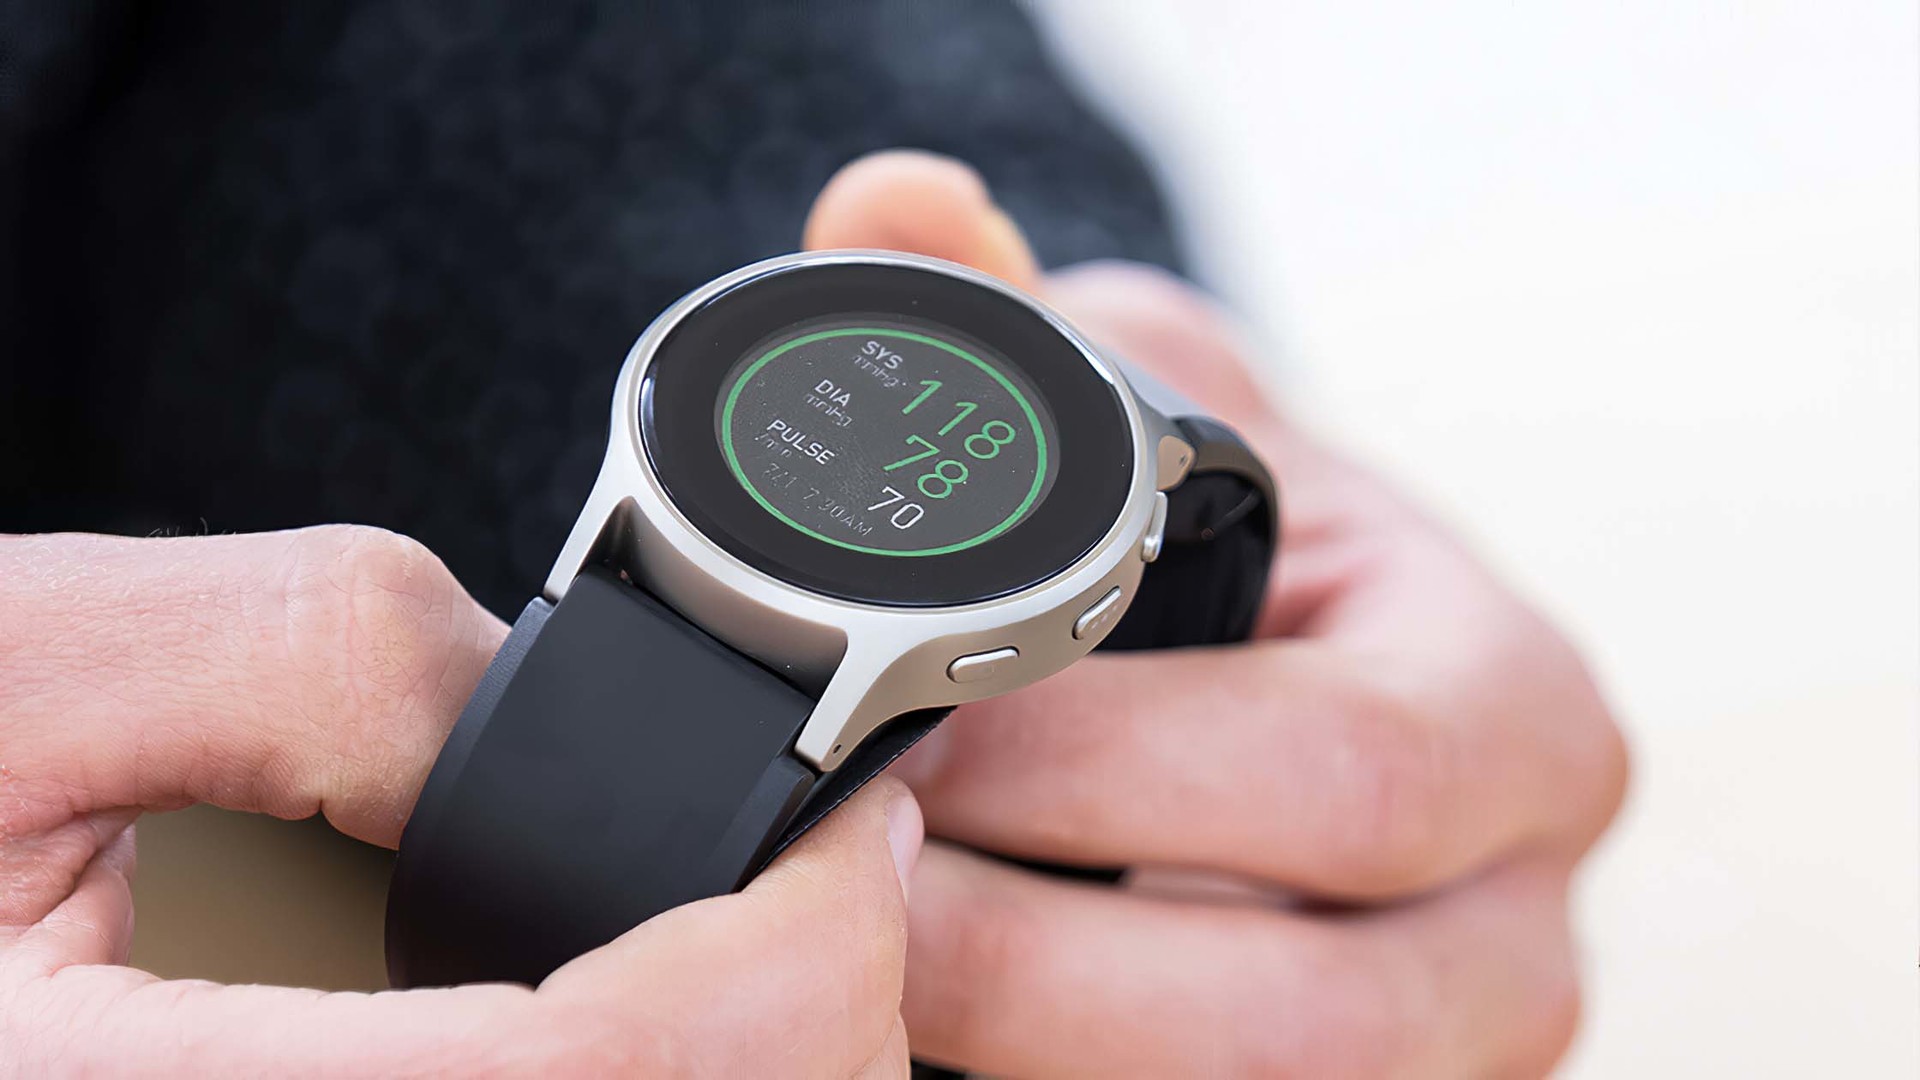 Omron HeartGuide packs blood pressure monitor into a smartwatch